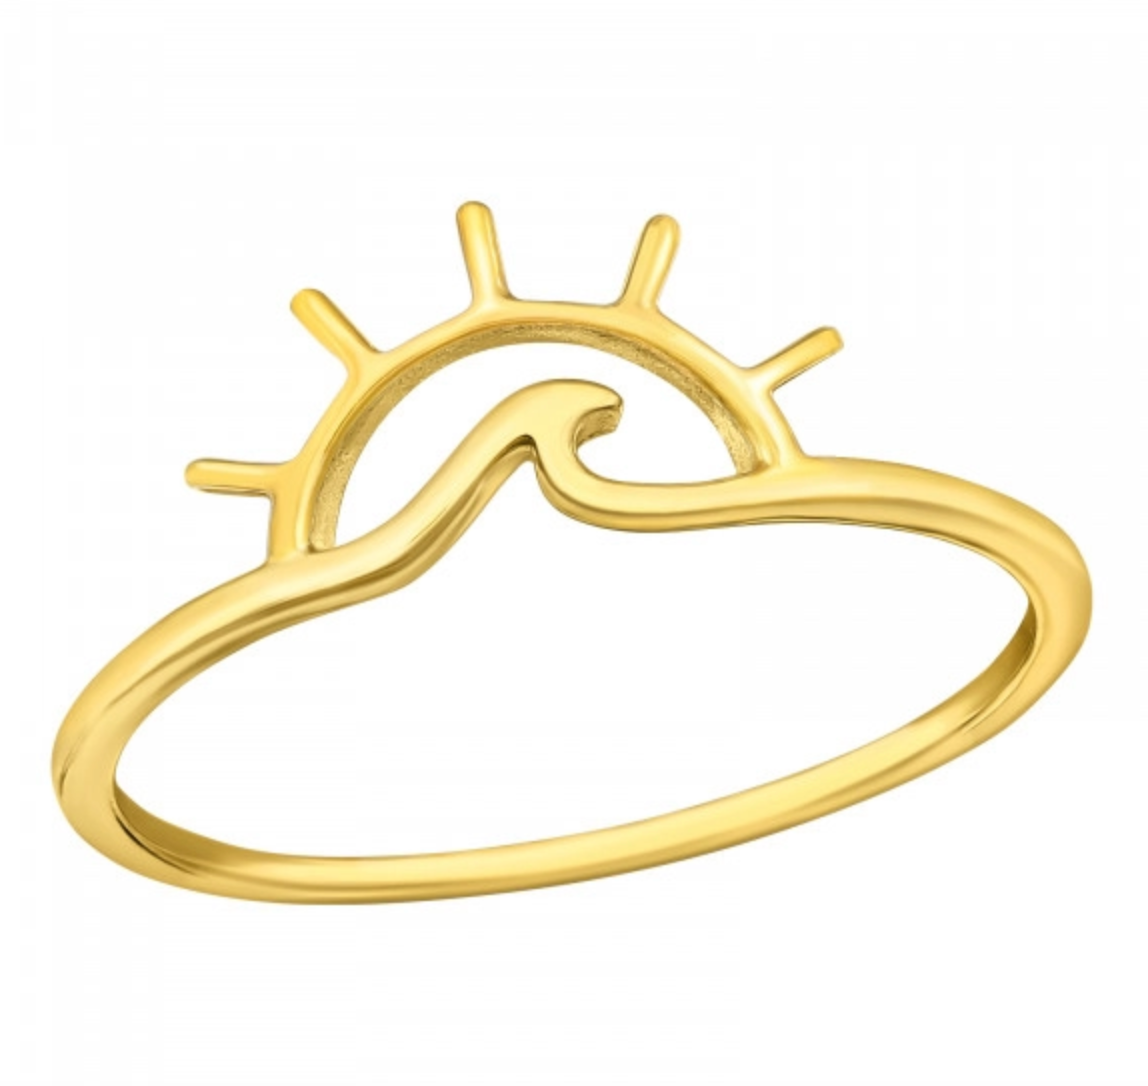 $ALE - Rise + Shine Ring - Gold Plated